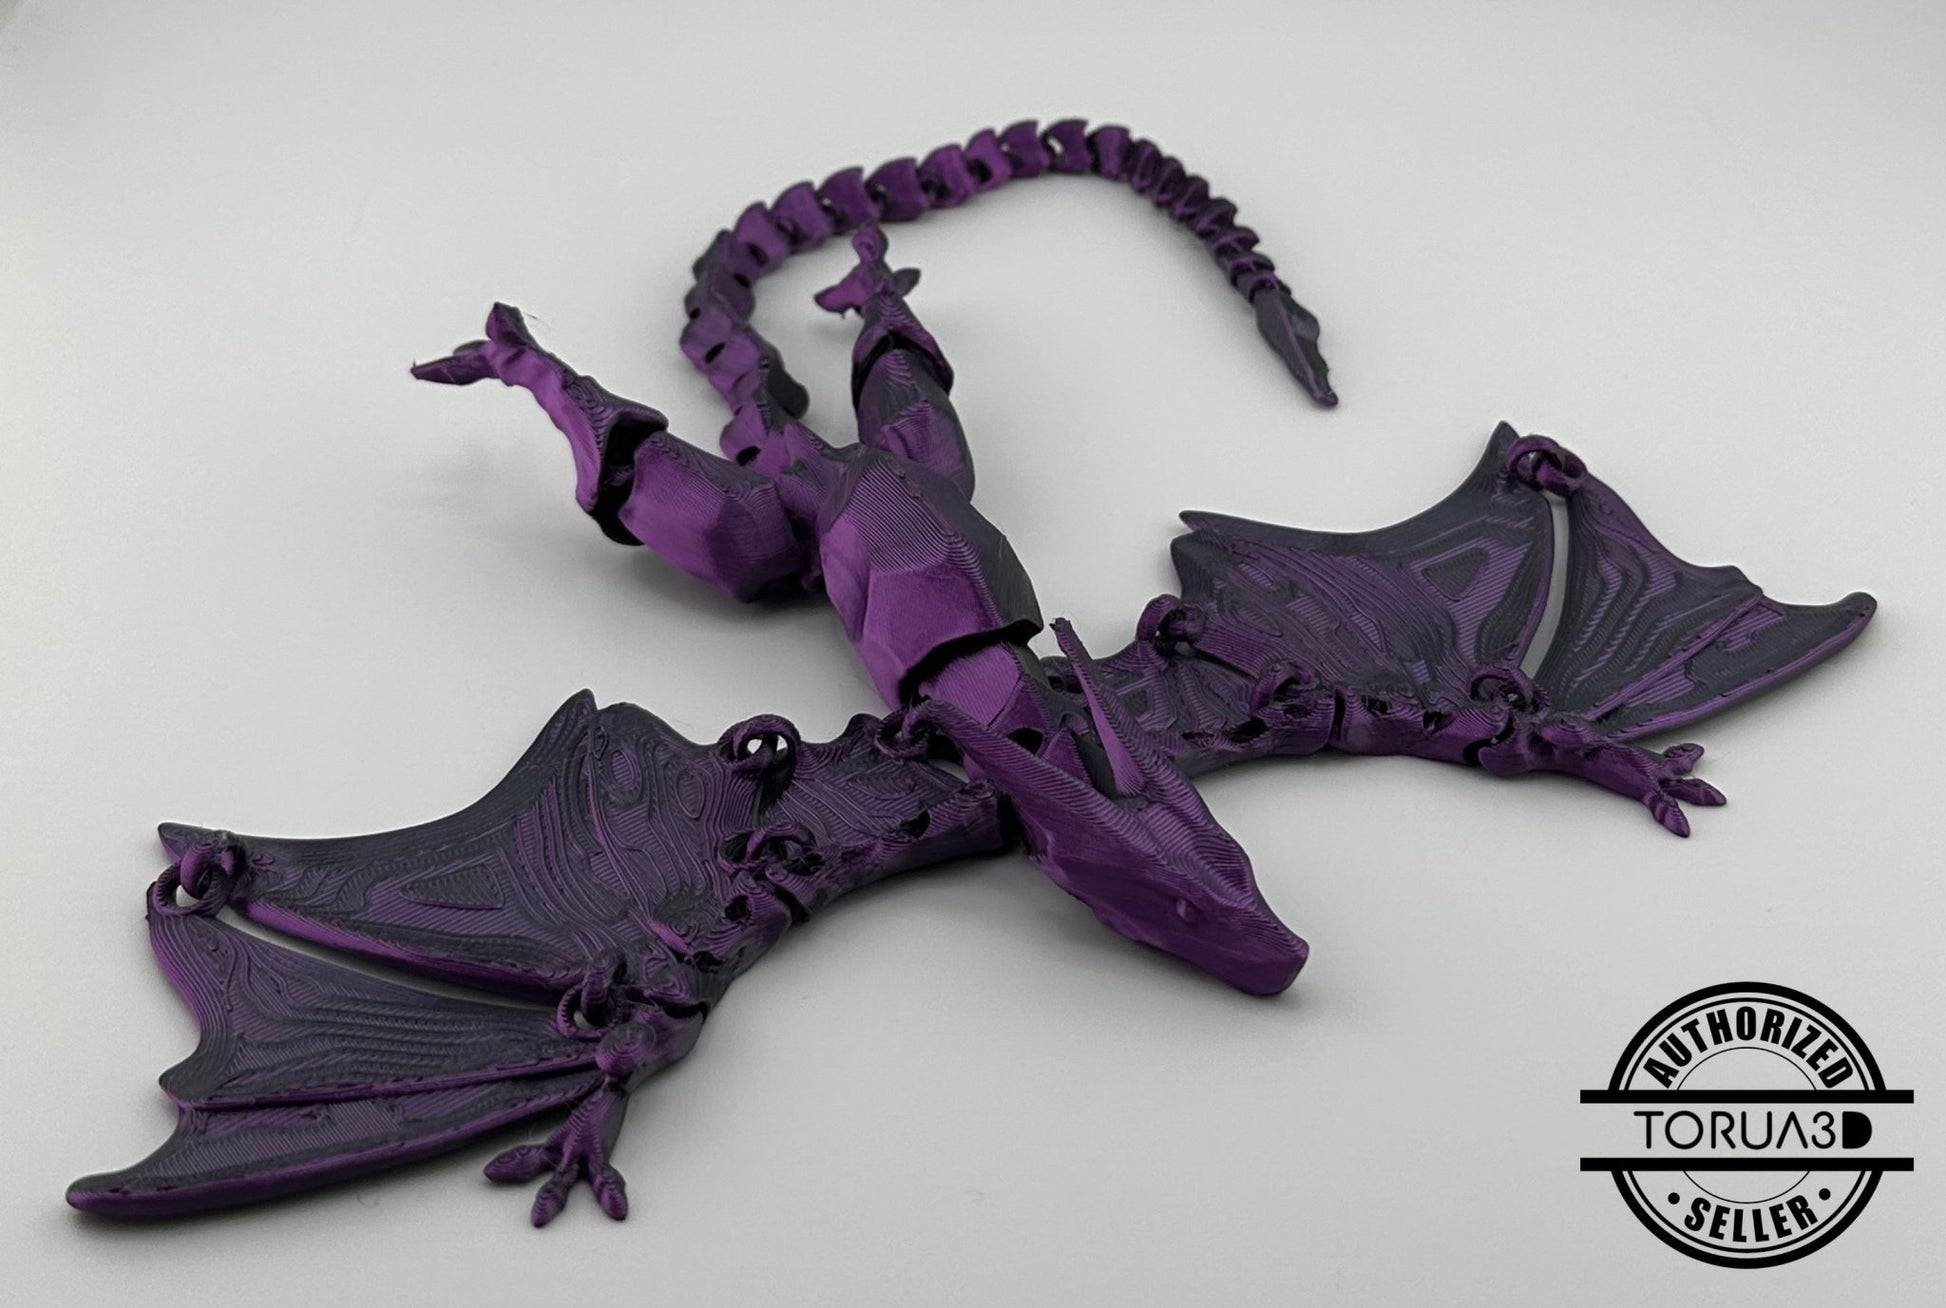 Articulated Dragon Fidget Toy